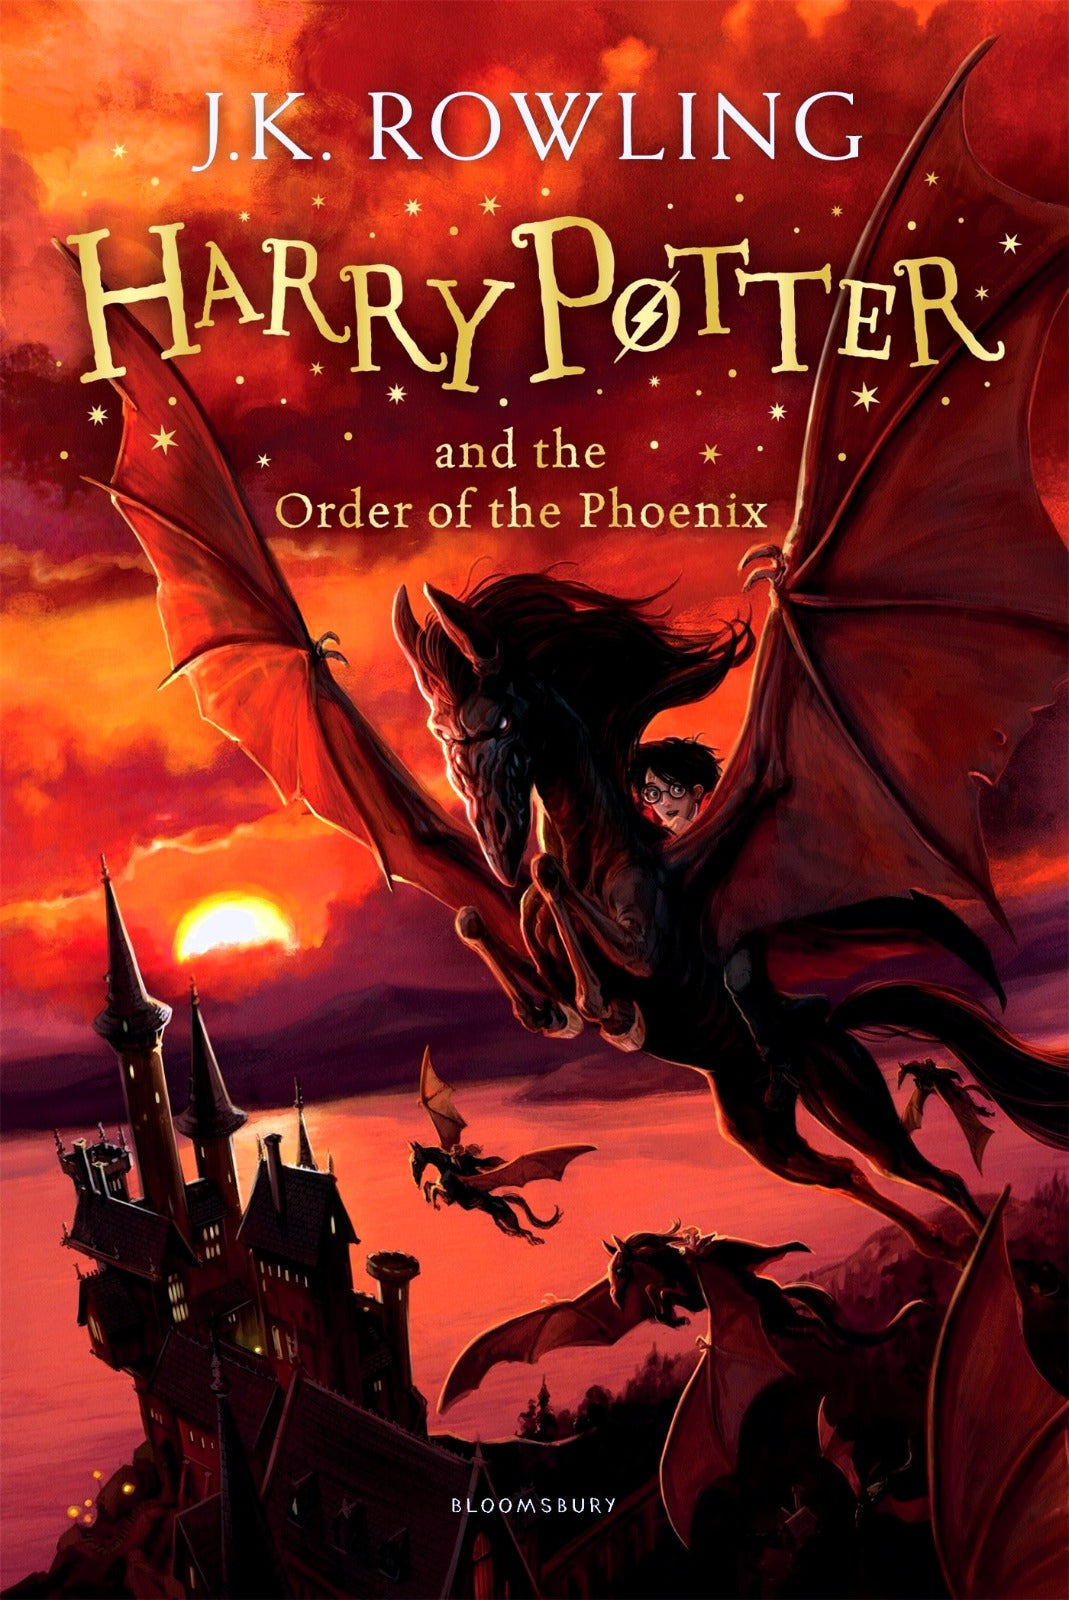 Harry Potter #5 Harry Potter and the Order of the Phoenix